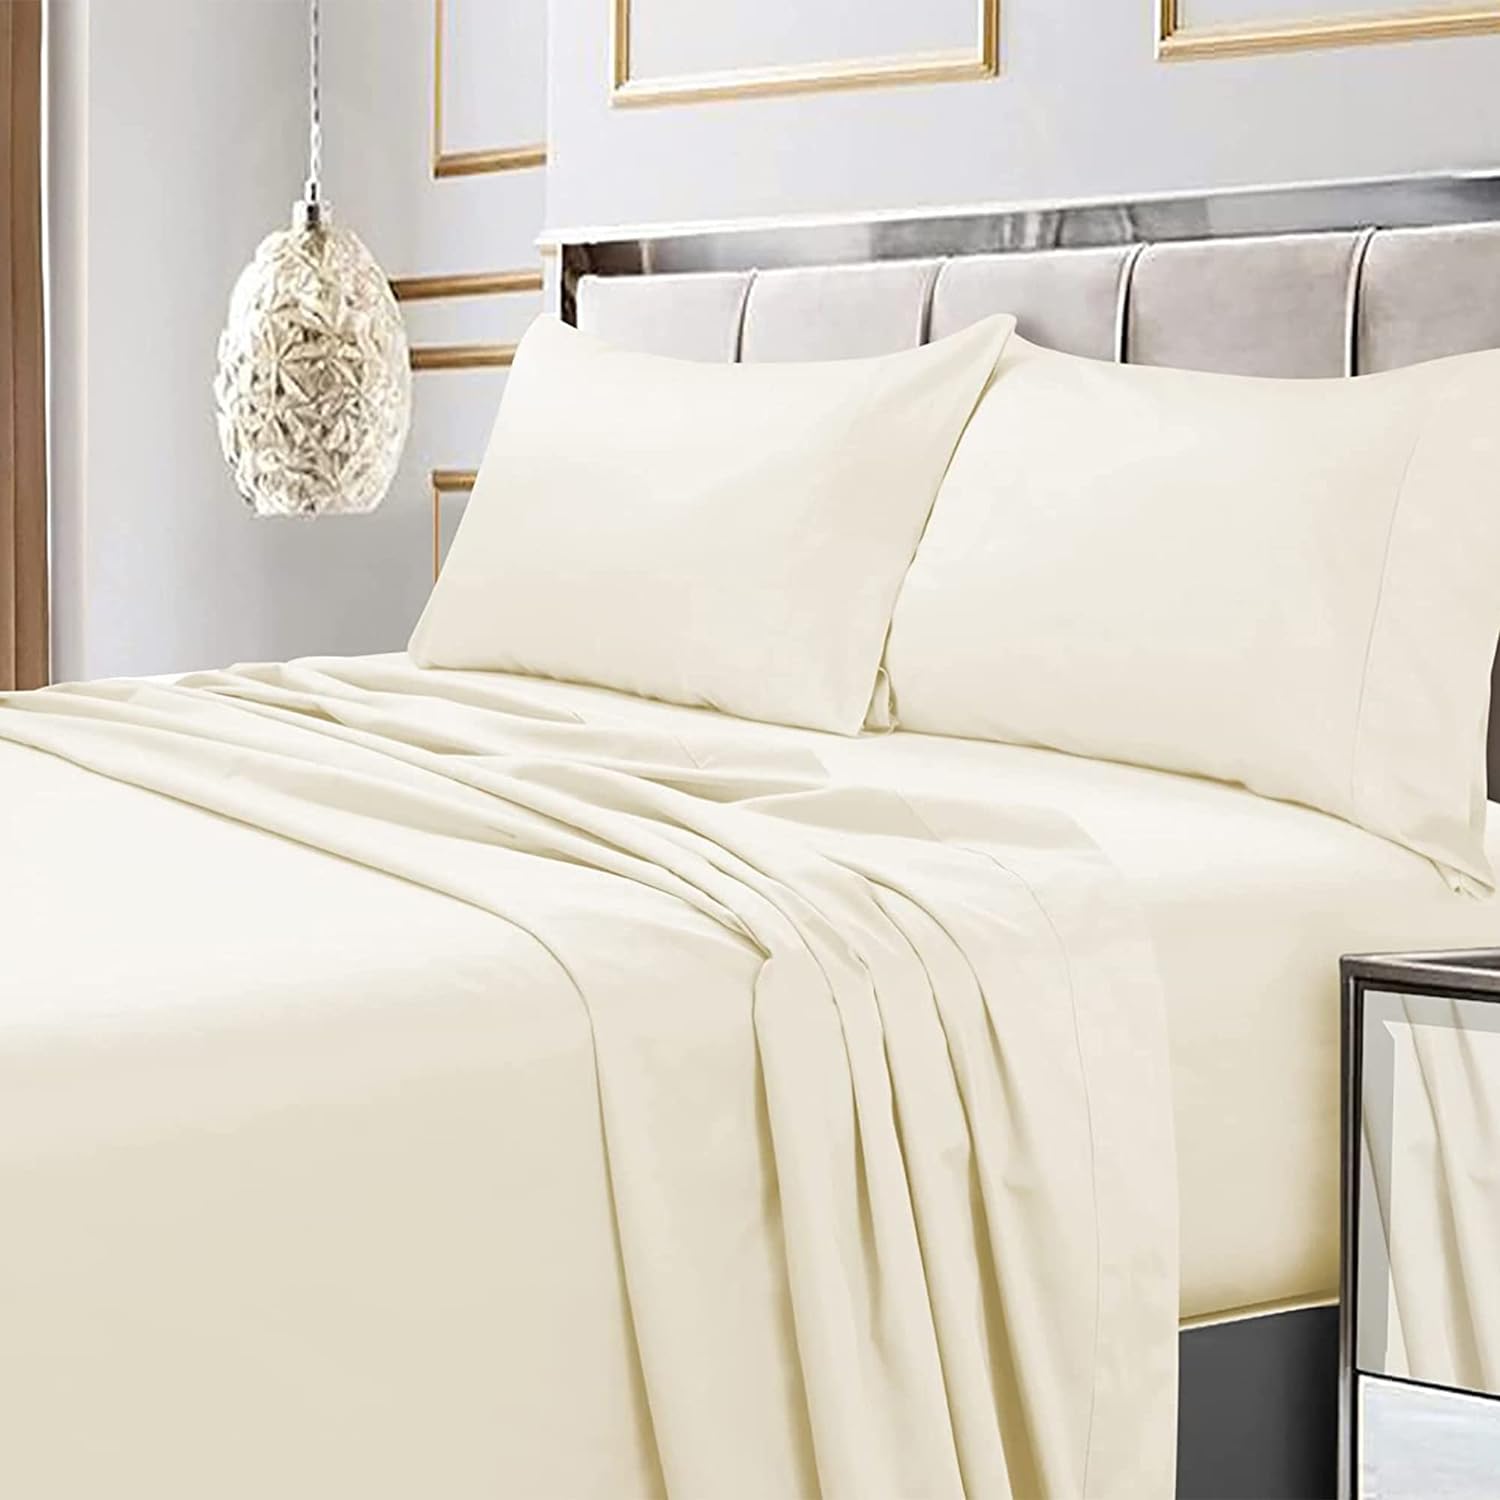 Tribeca Living Soft Egyptian Cotton Sateen Solid Pillowcase Set Extra Deep Pocket, 600 Thread Count, Bed Sheet, Cal King, Ivory